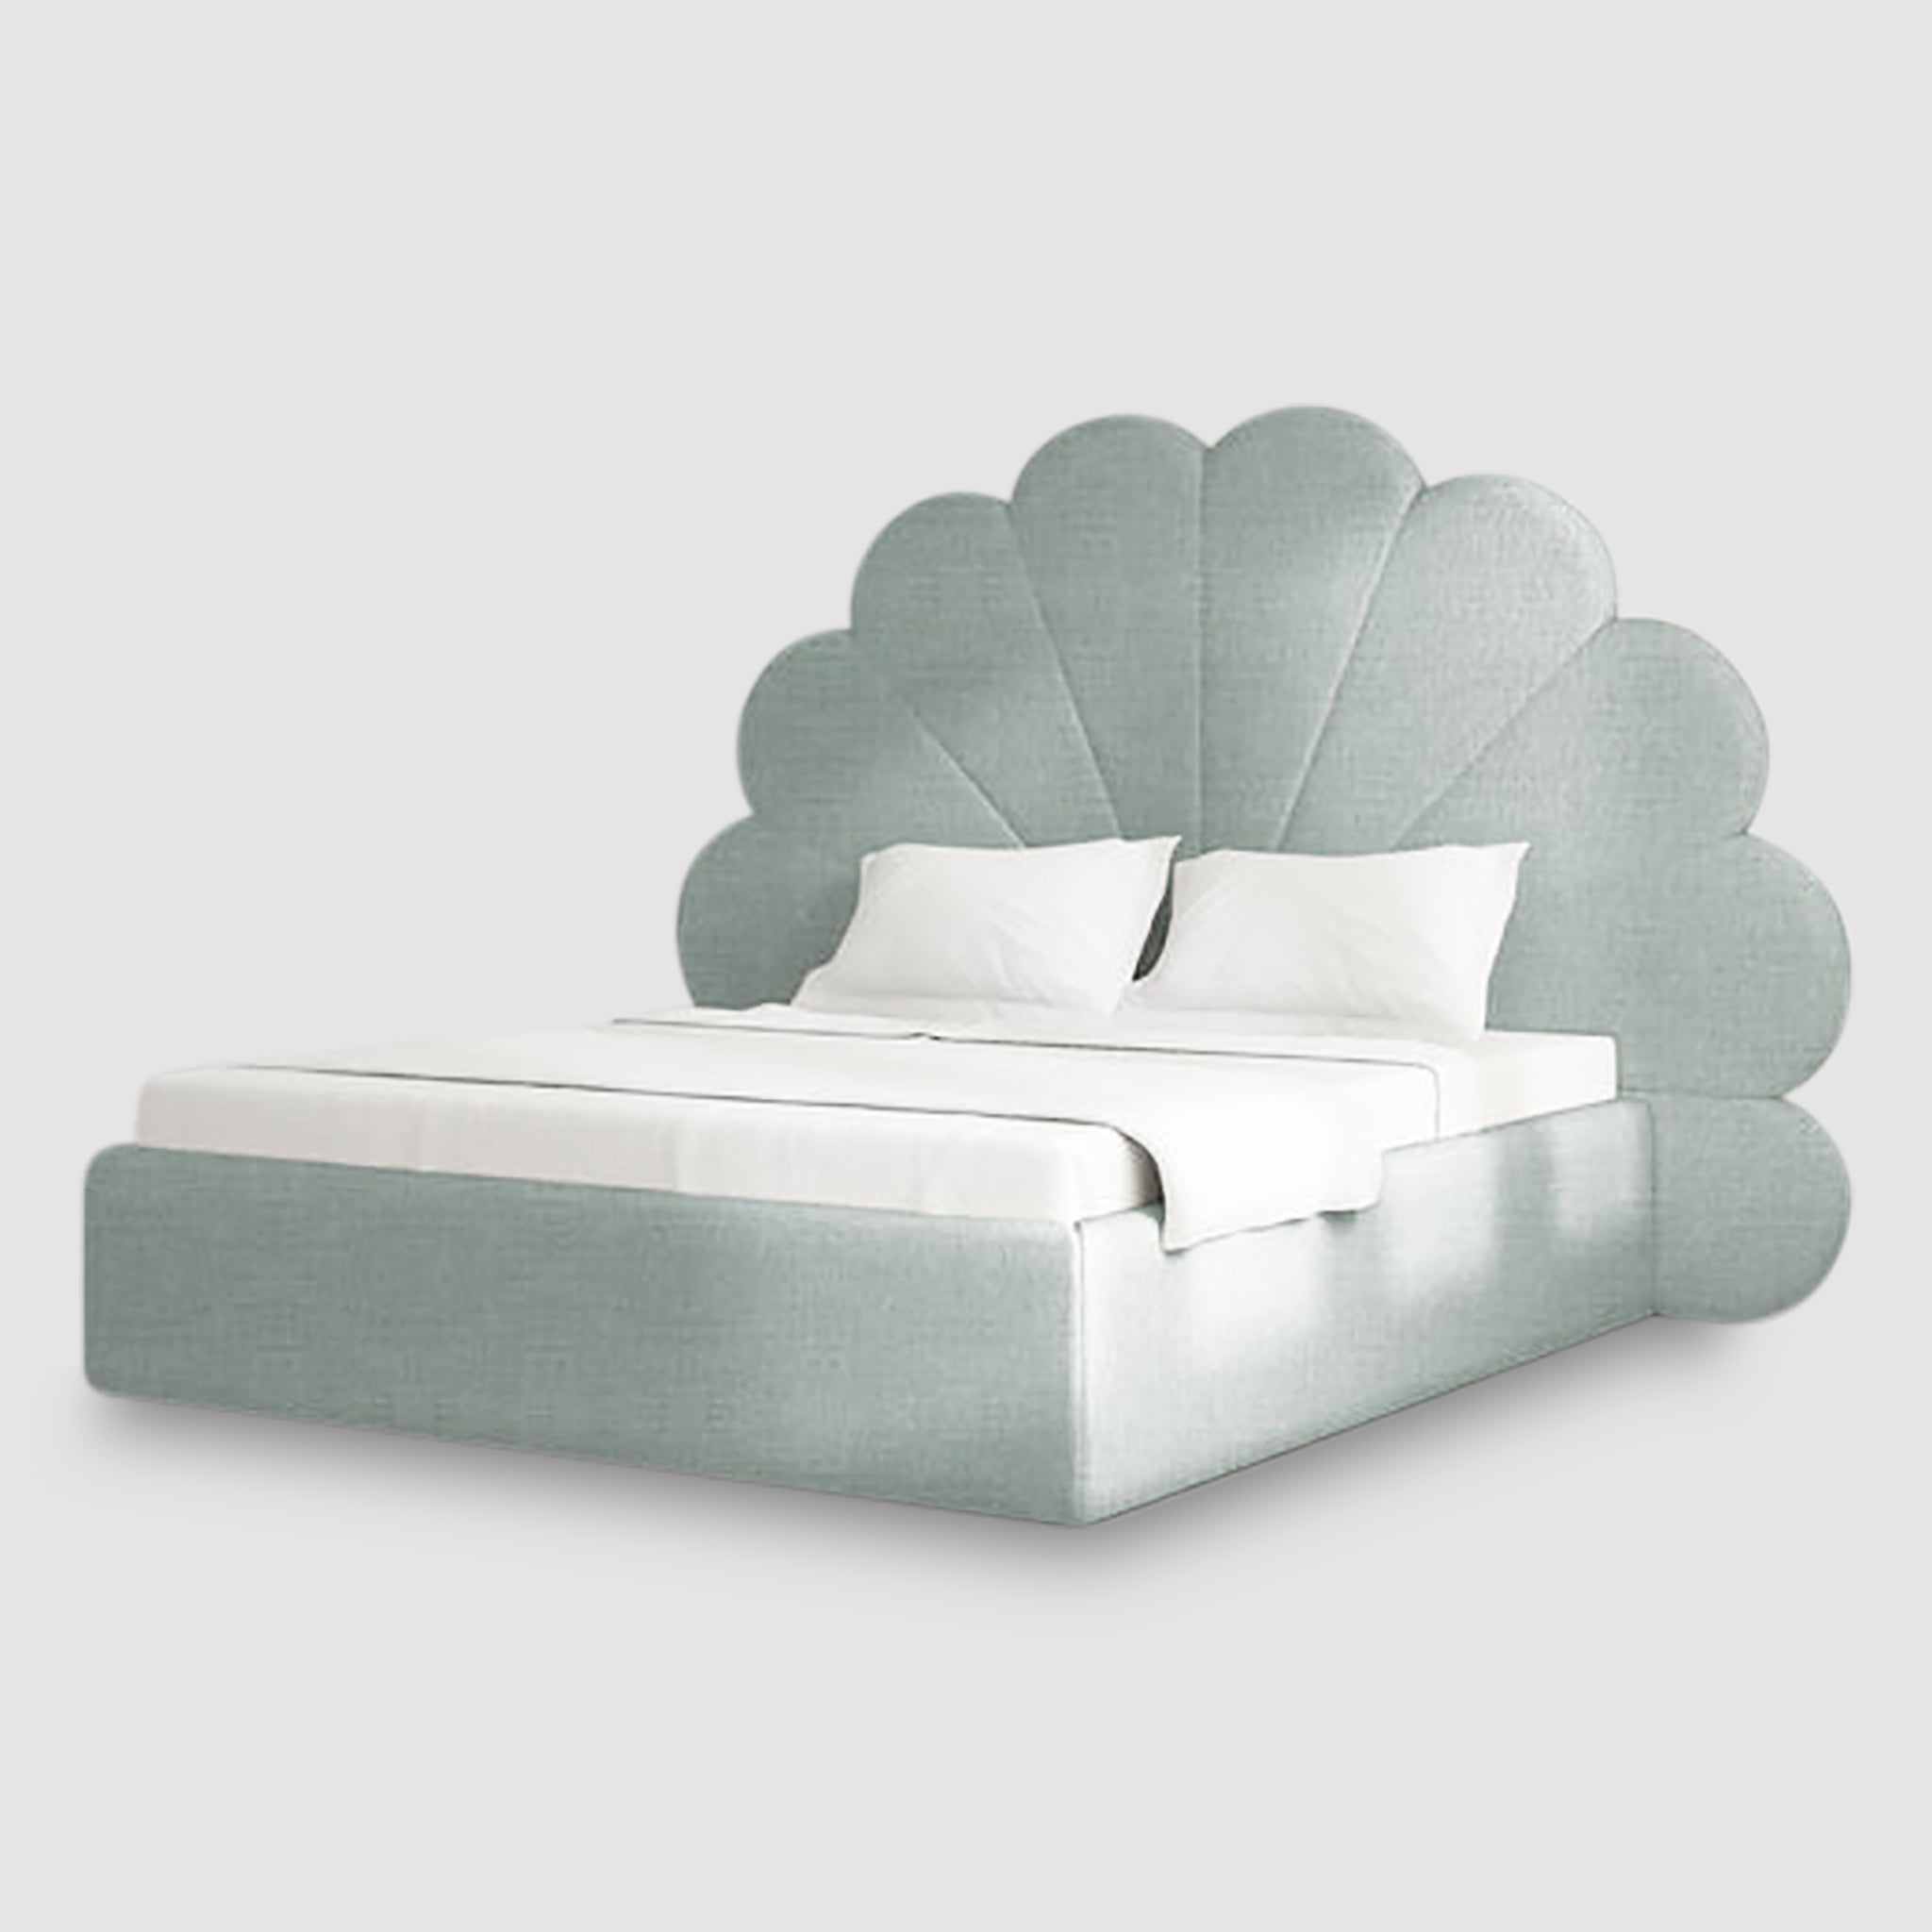 Sophisticated queen size Kyle Bed for a tranquil sleep space